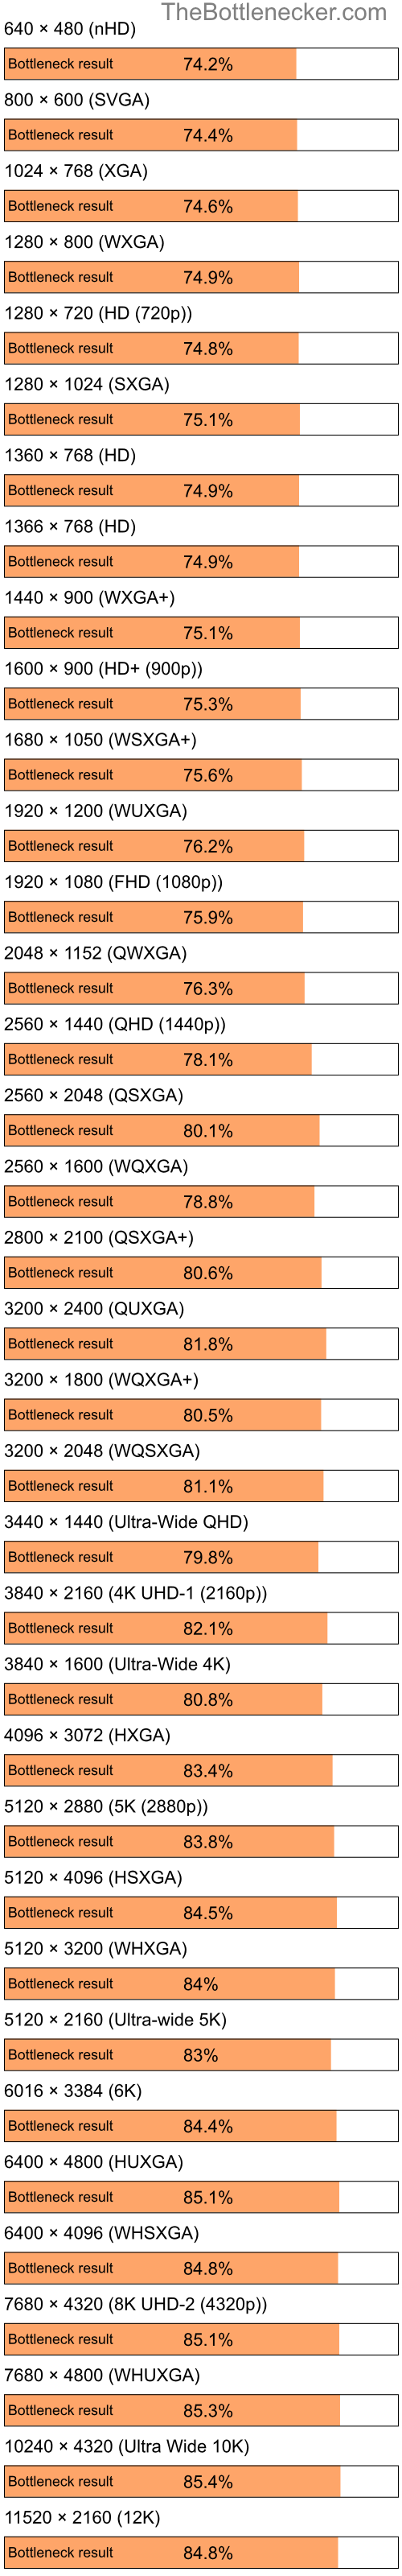 Bottleneck results by resolution for Intel Celeron M 410 and NVIDIA GeForce 9100M G in Graphic Card Intense Tasks